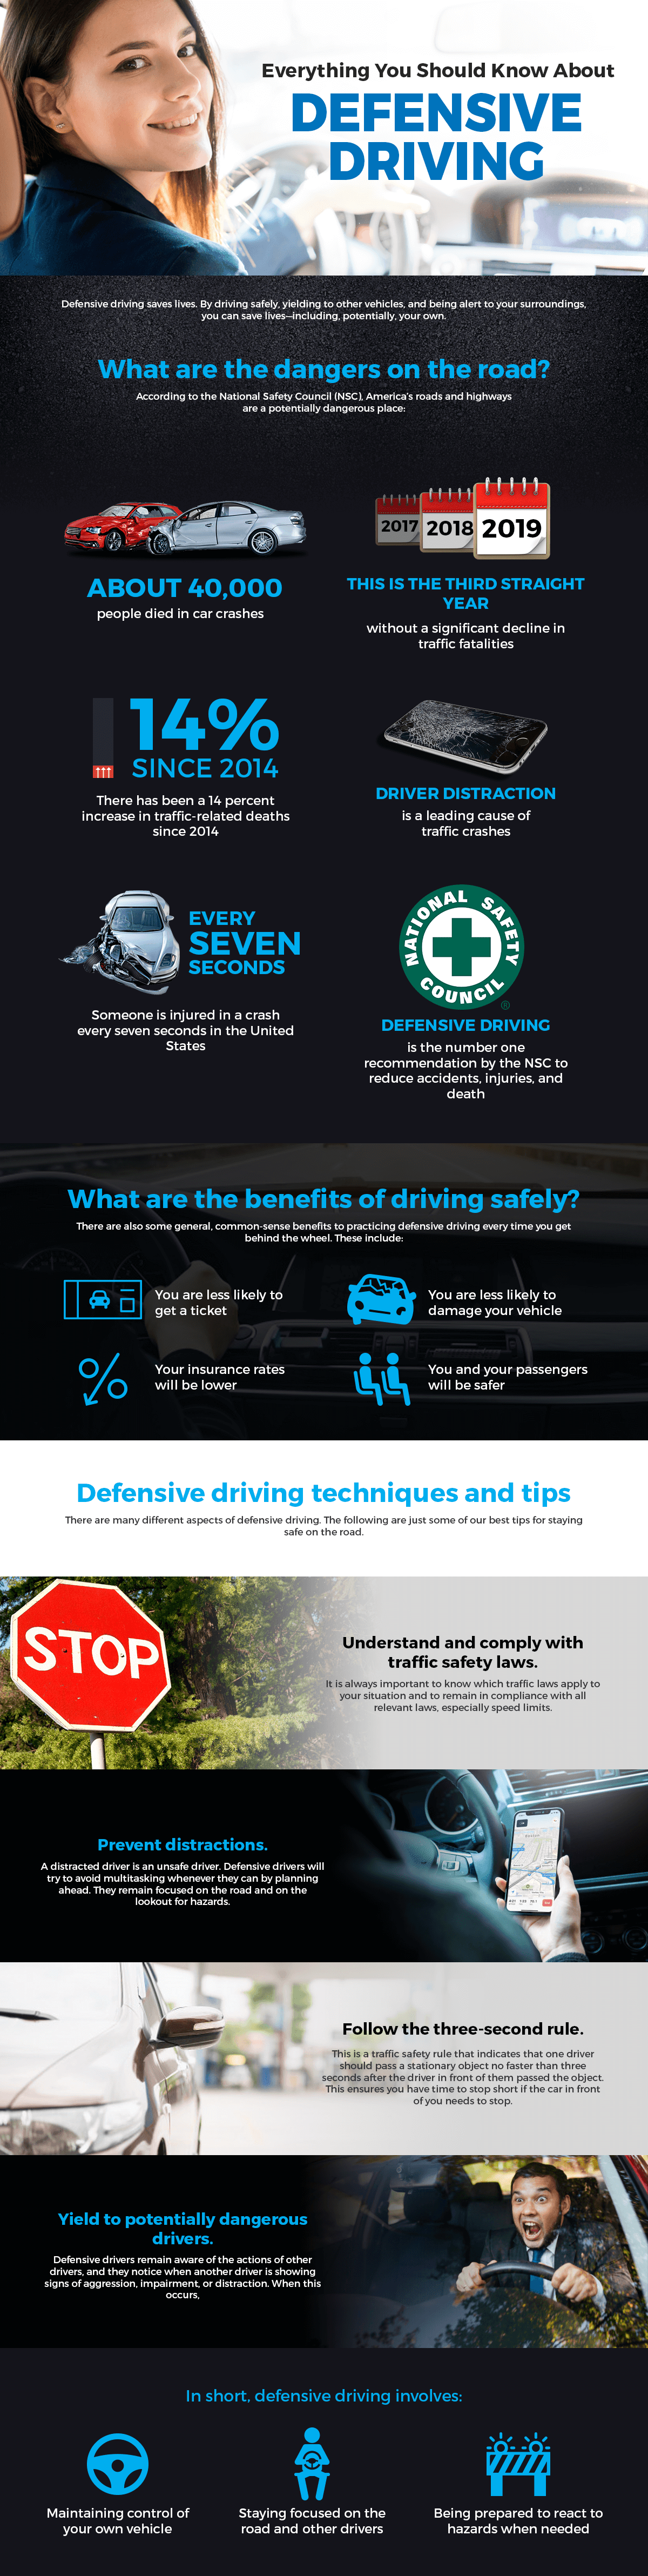 Infographic on Defensive Driving